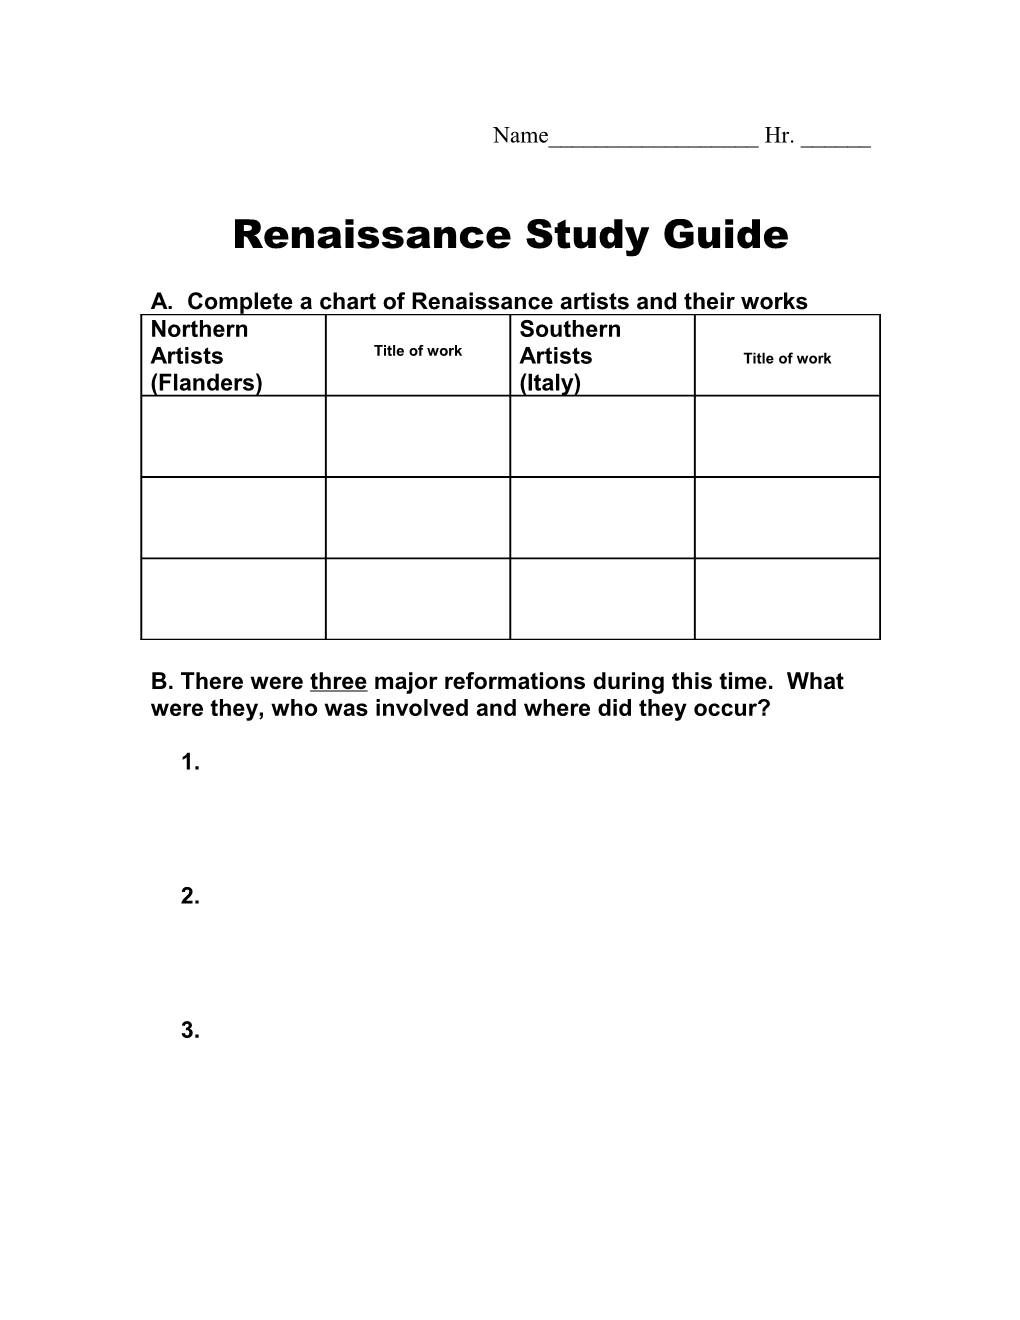 A. Complete a Chart of Renaissance Artists and Their Works